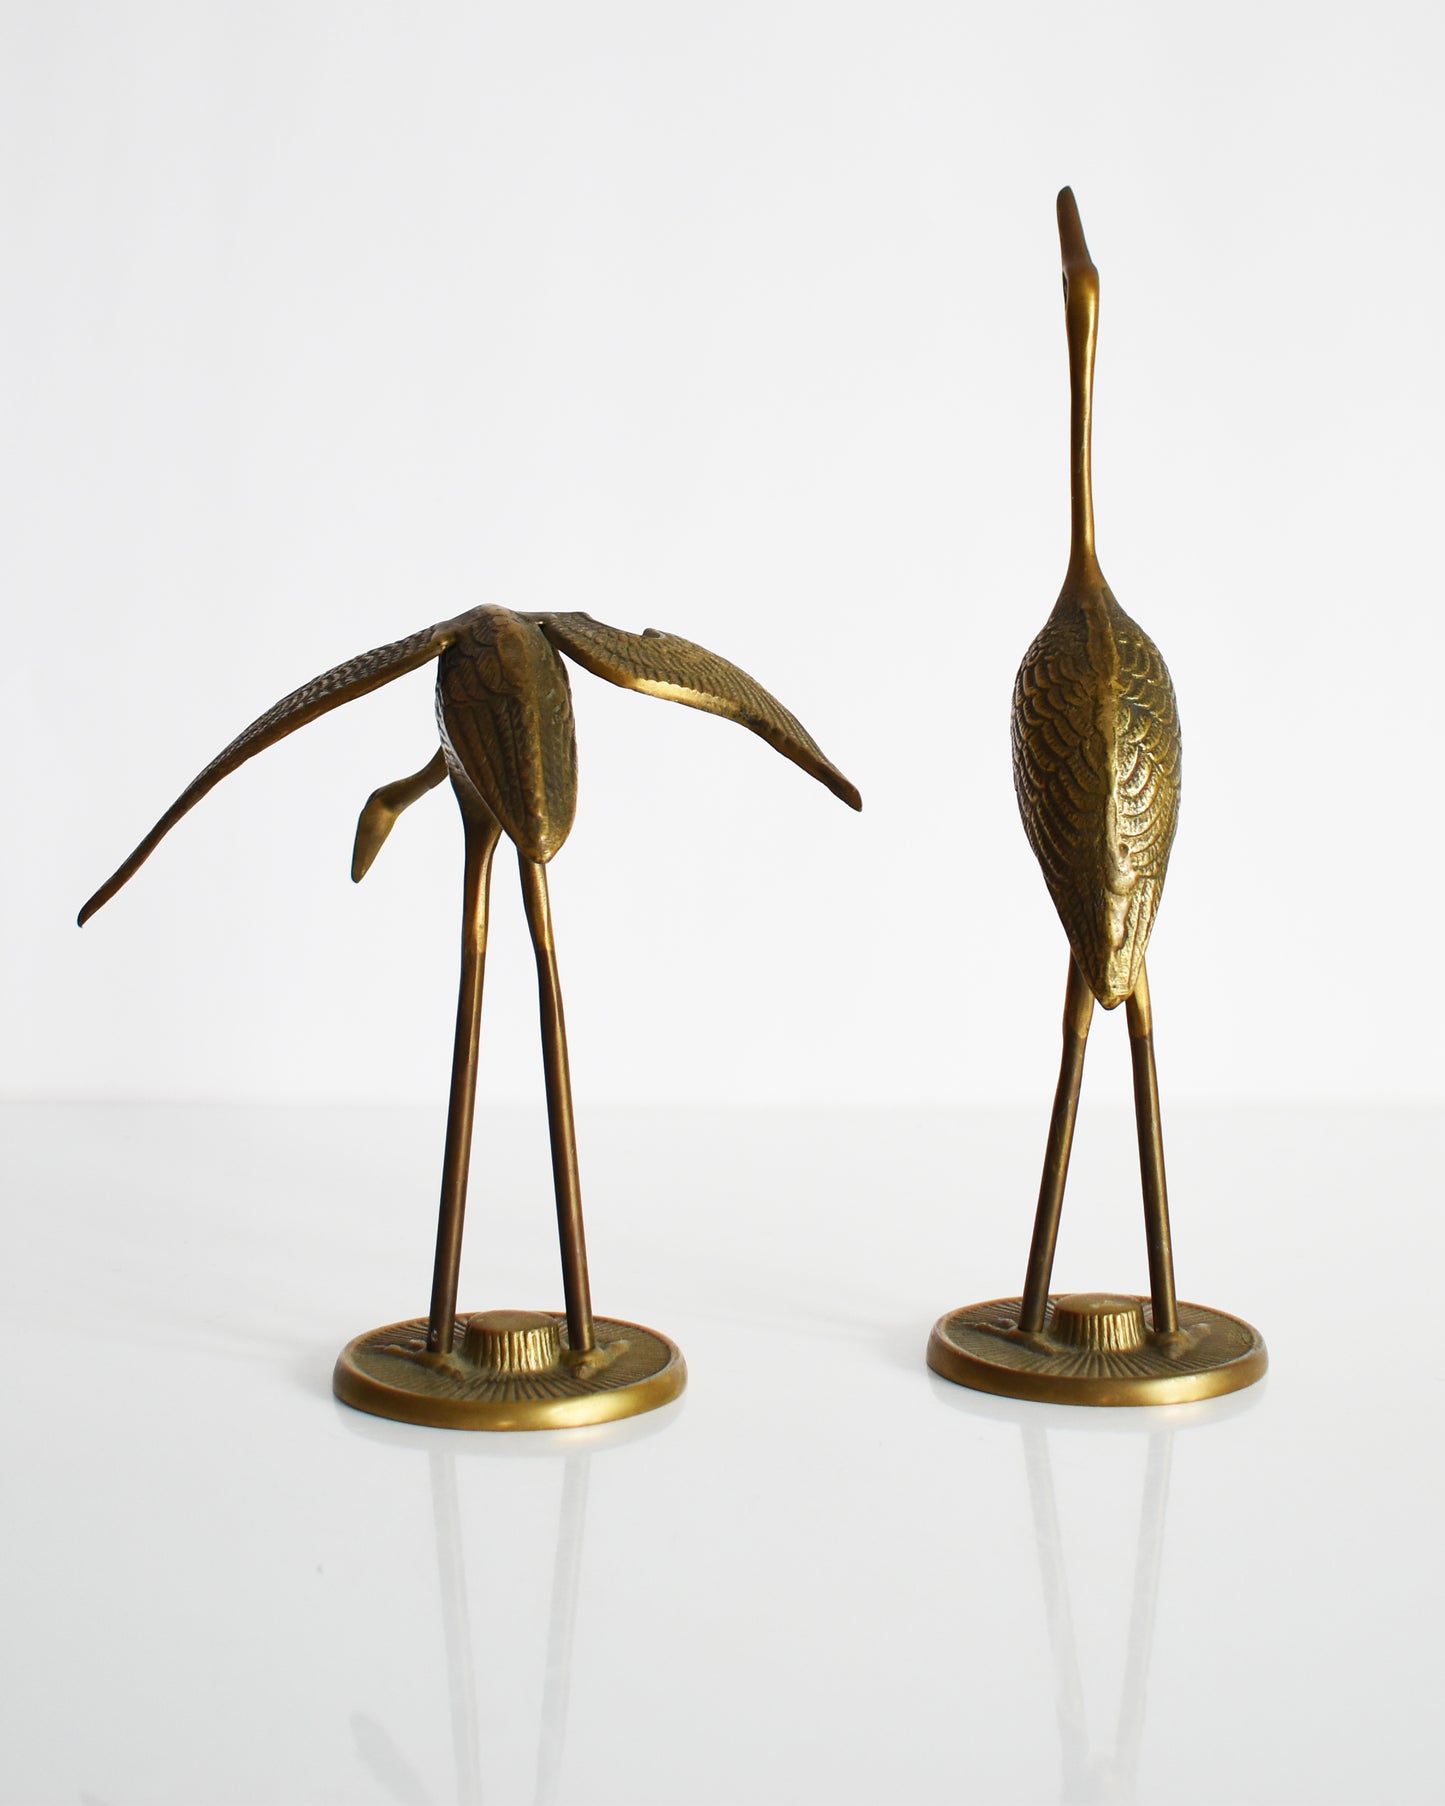 Back view of a pair of vintage brass cranes that have ornate carved detail on their wings and body.